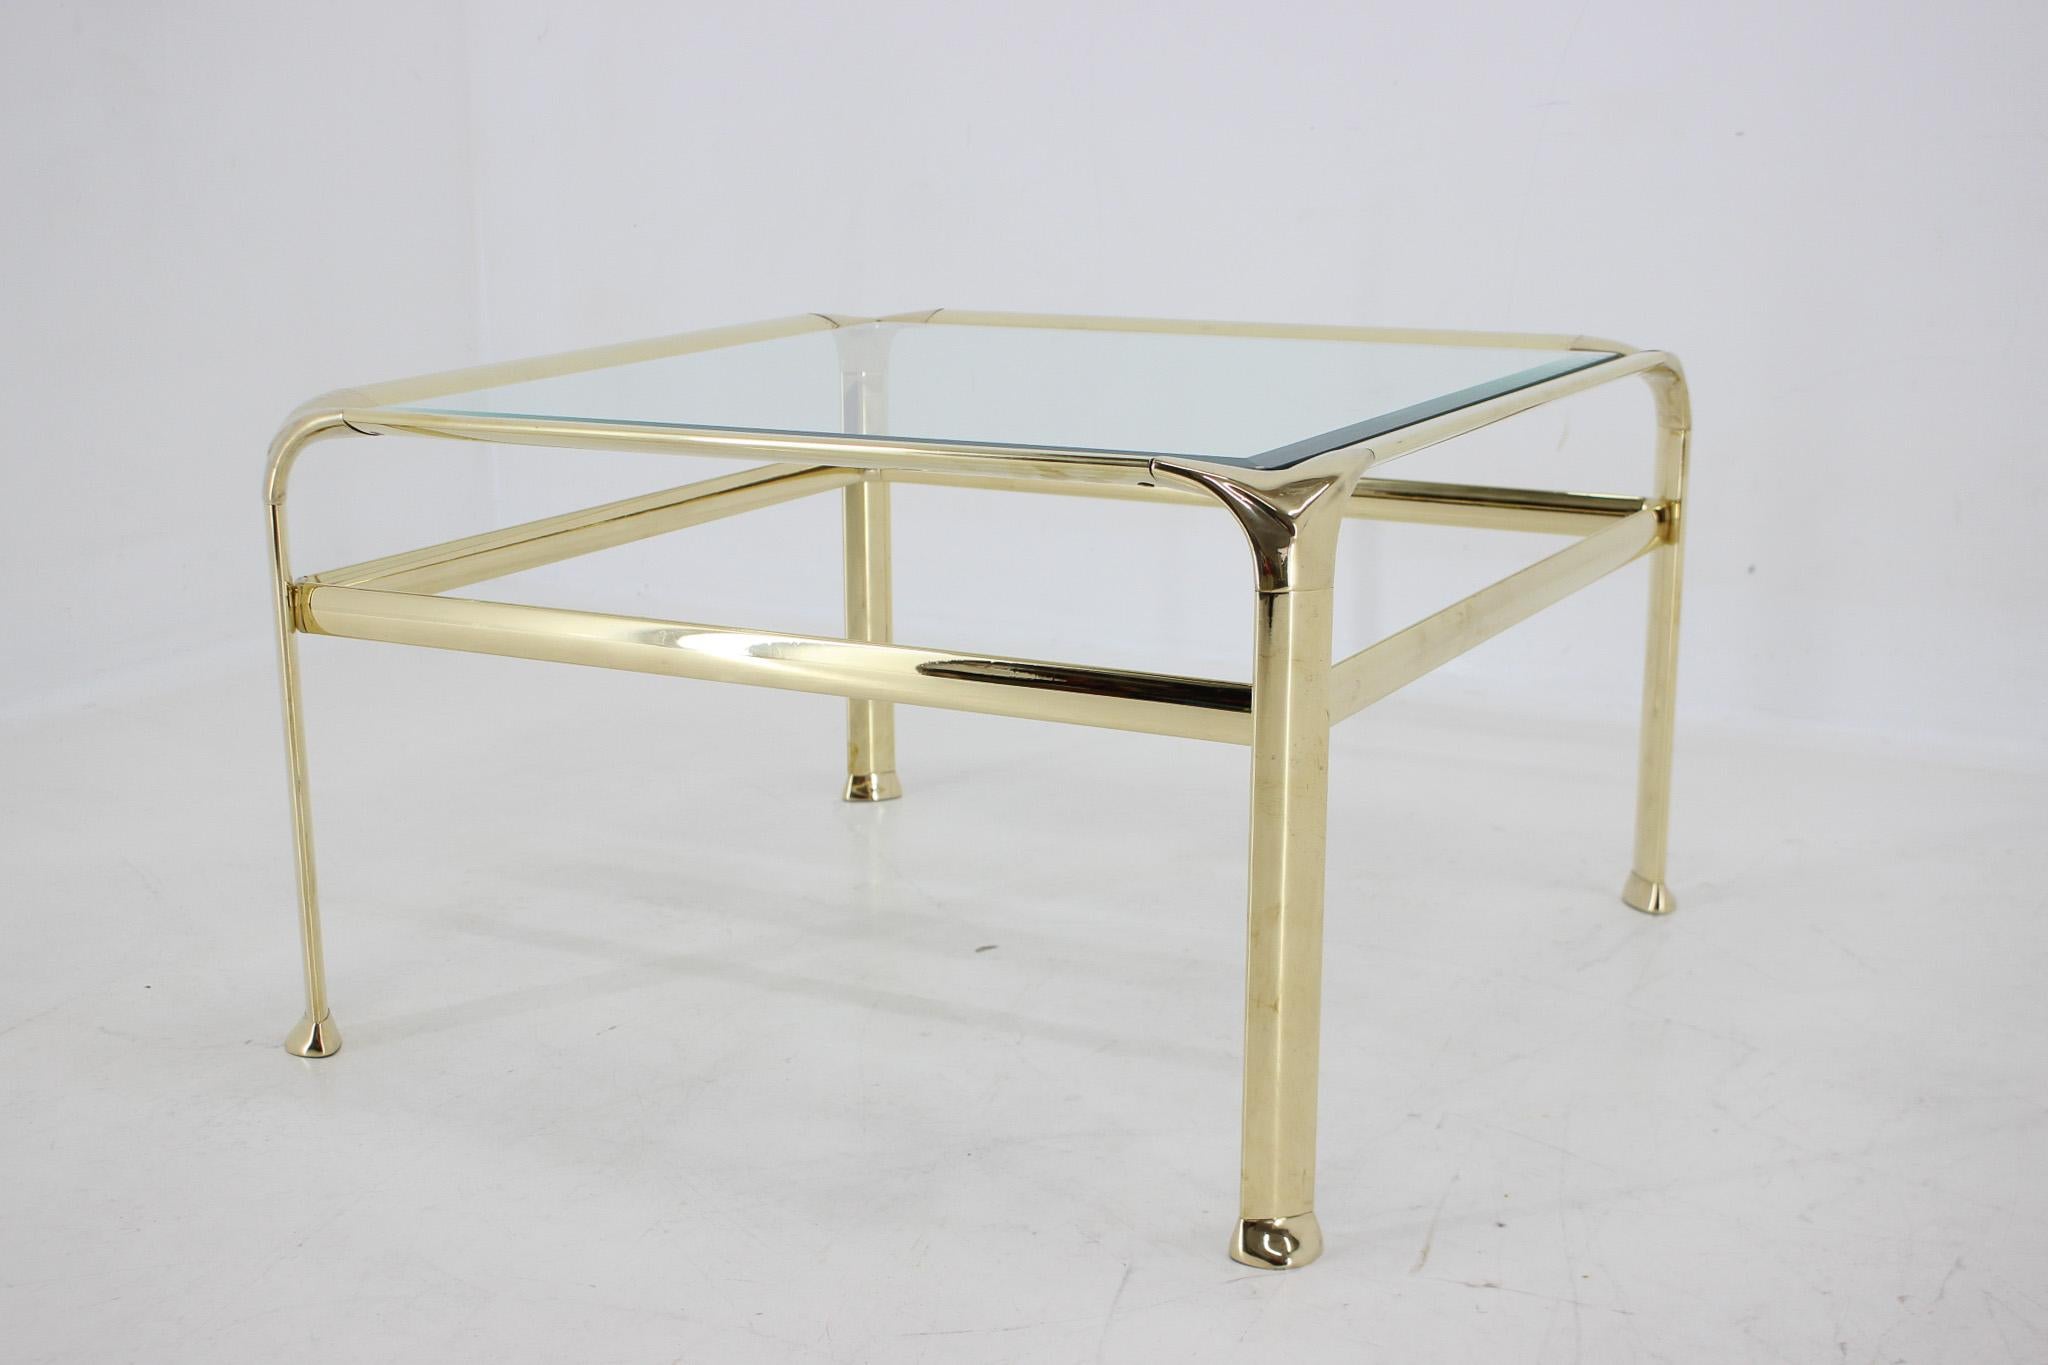 Mauro Lipparini Coffee Table, Brass & Glass, 1970's, Italy For Sale 3